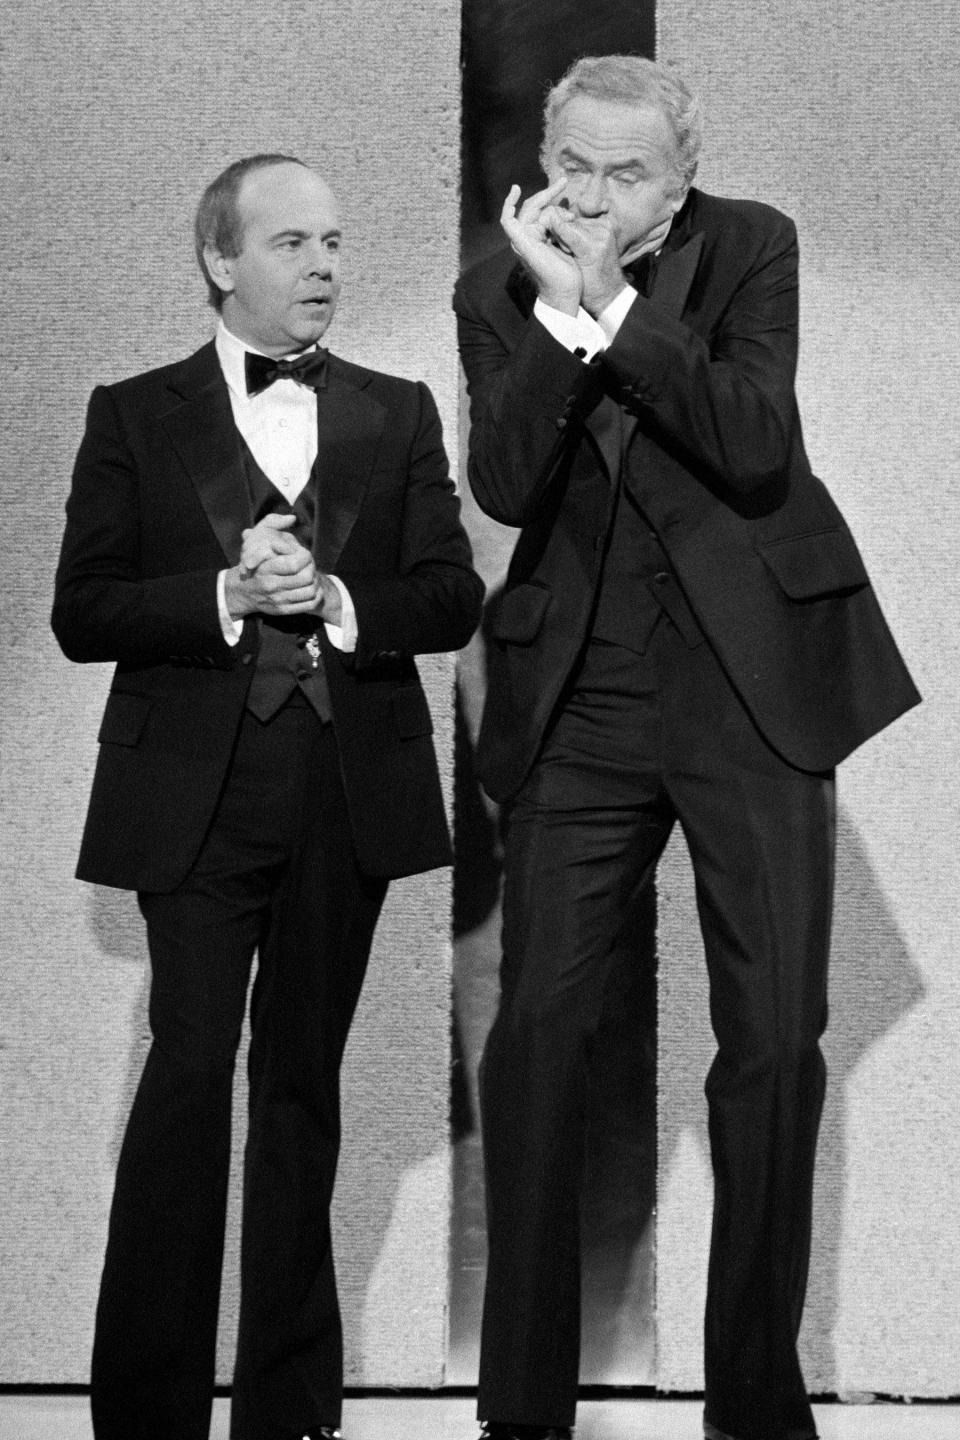 His own sitcom, <em>The Tim Conway Show</em>, lasted one season in 1970. His variety show of the same name aired from 1980-81, with guest appearances from collaborators like Harvey Korman, pictured.